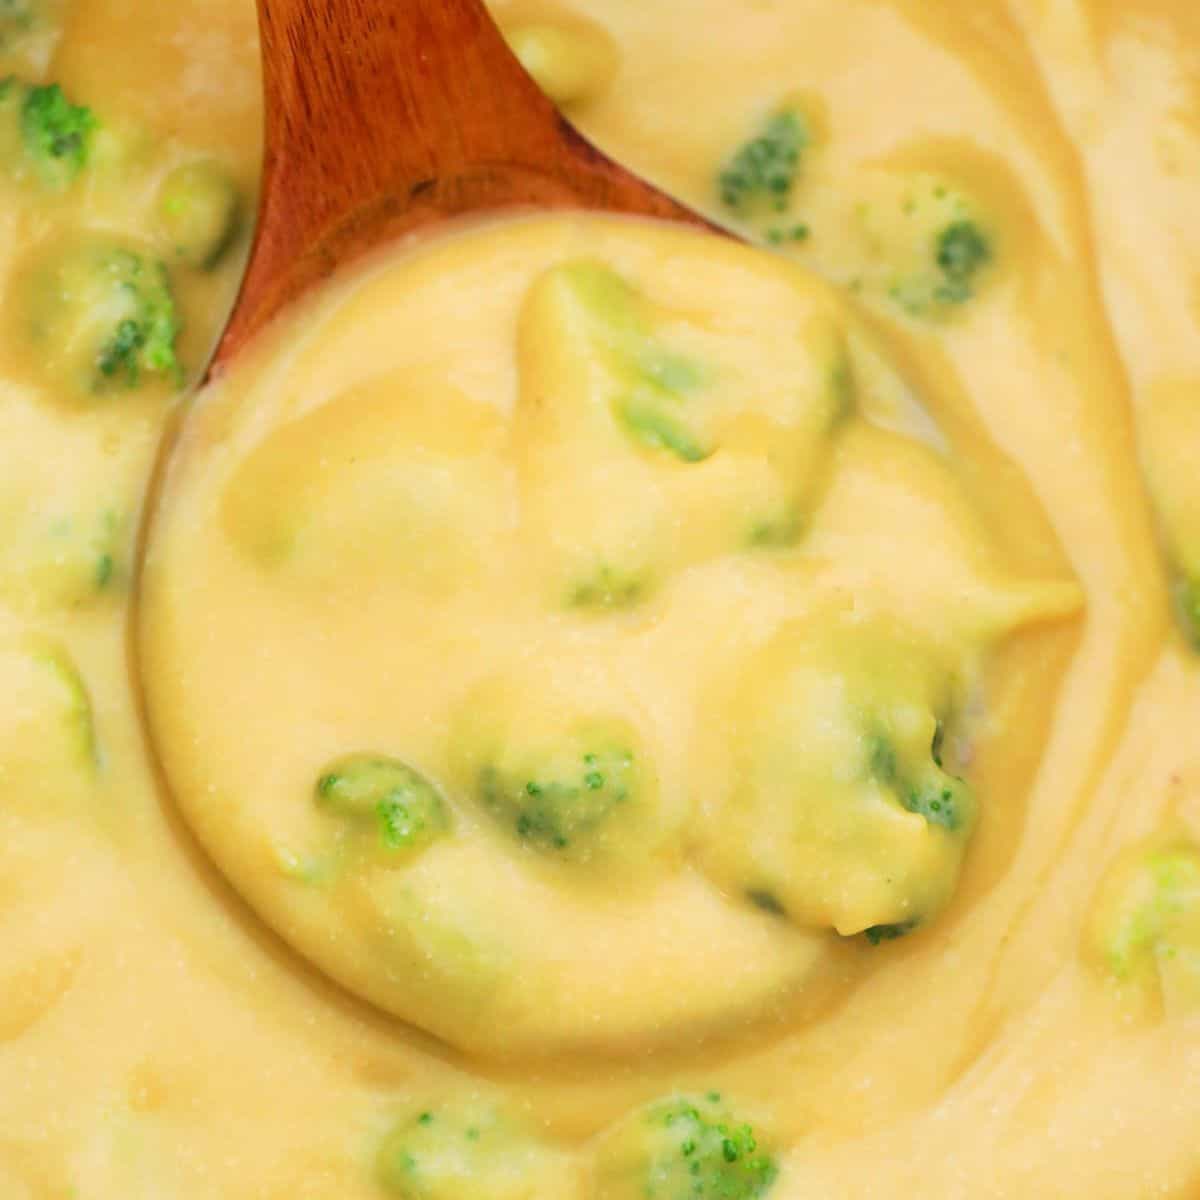 Ladle of creamy soup with broccoli pieces inside pot.